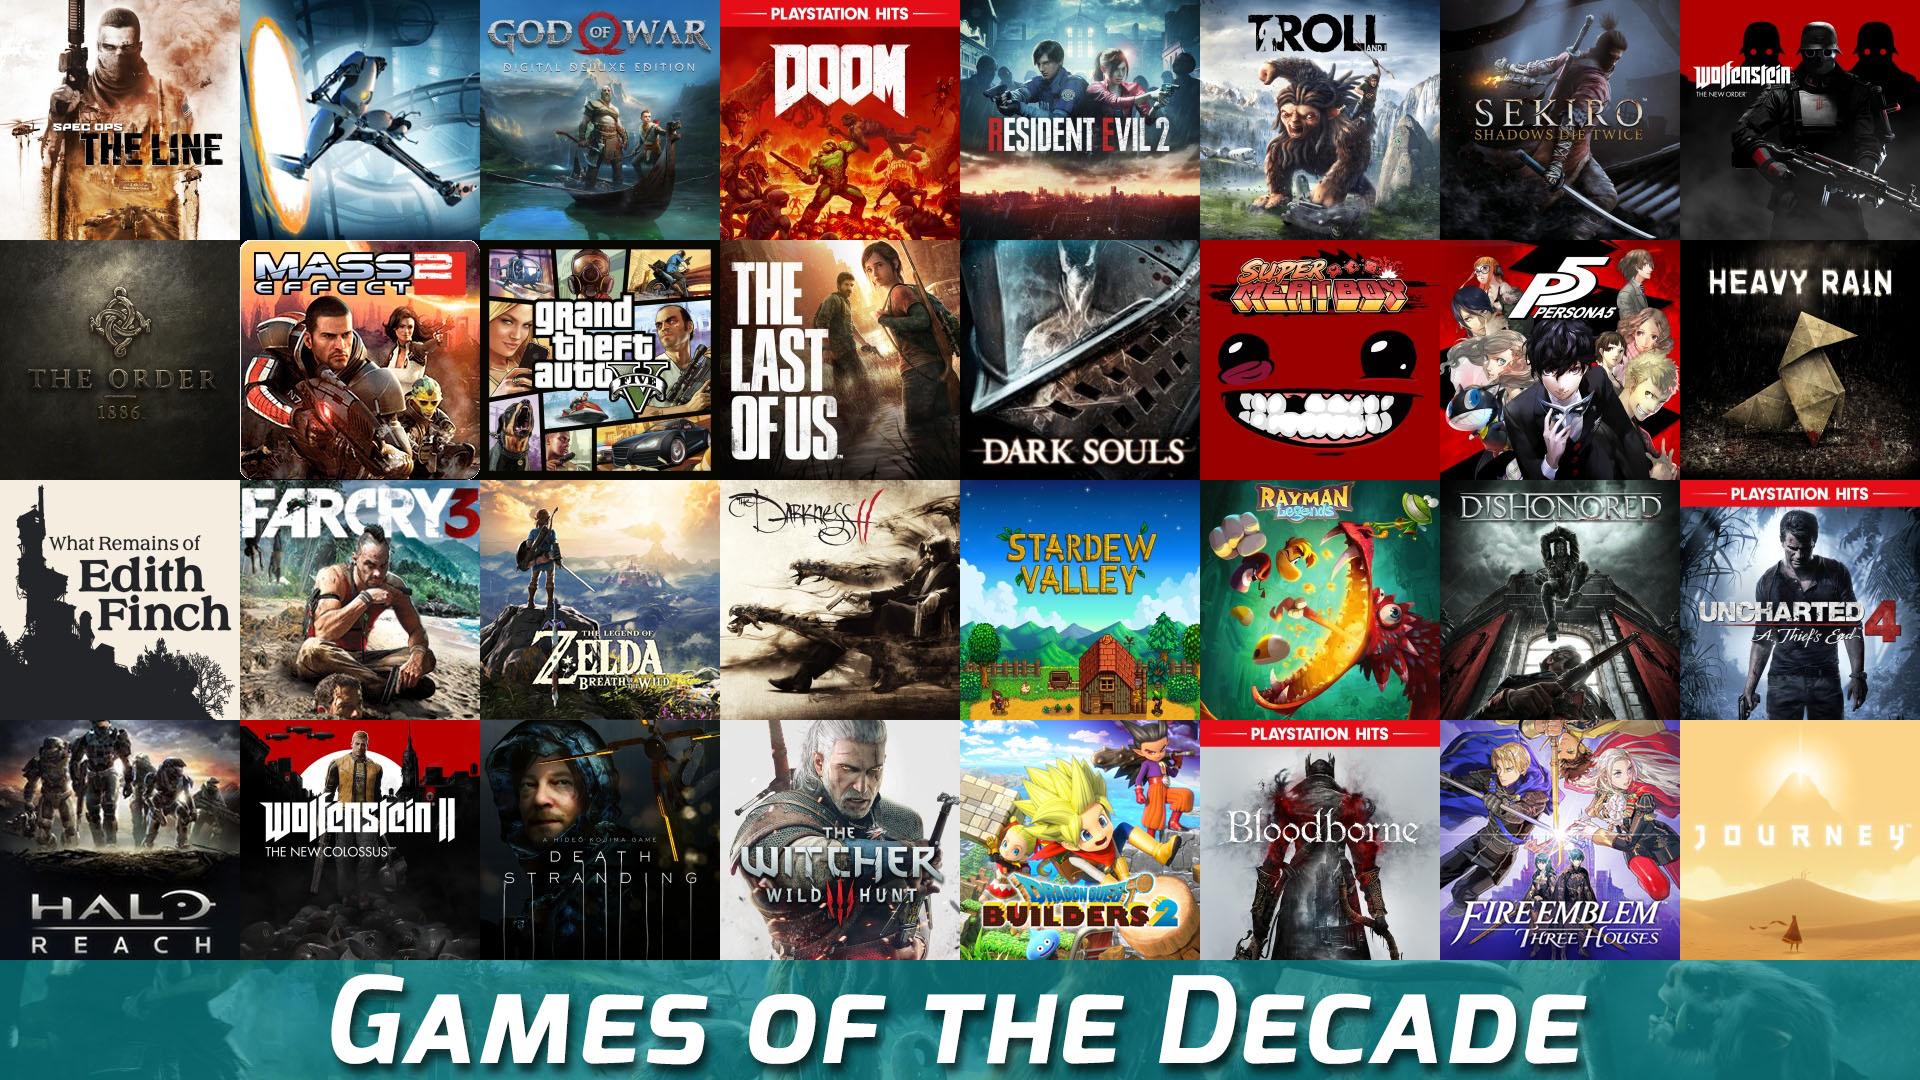 WellPlayed's Games of the Year 2019